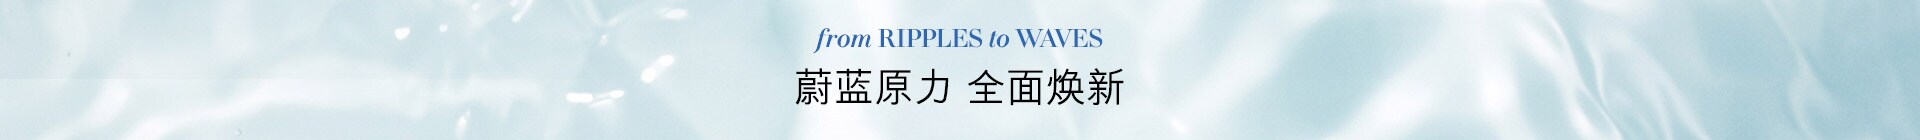 From RIPPLES to WAVES 蔚蓝原力 全面焕新